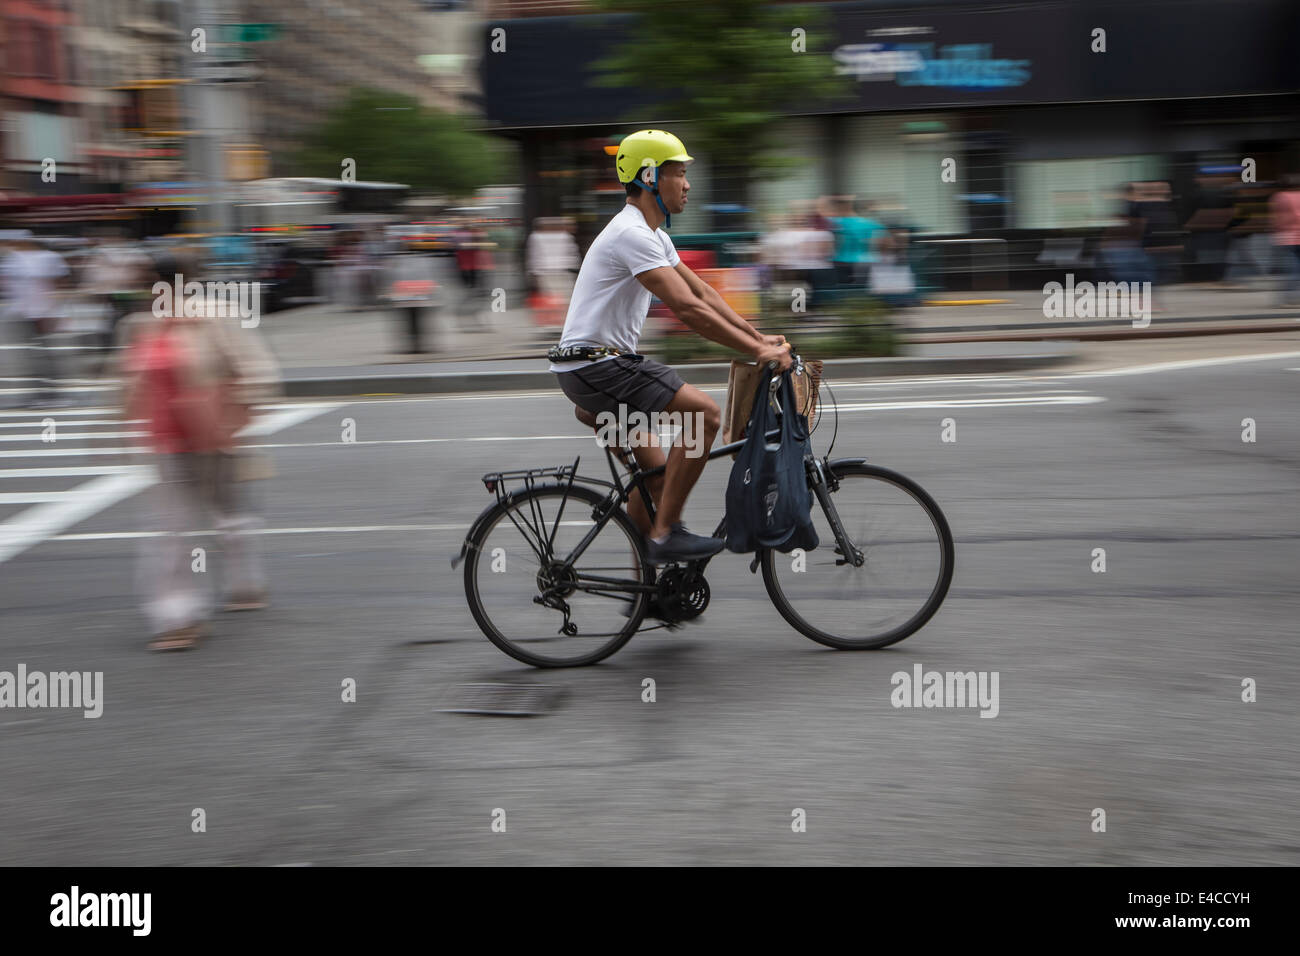 A man rides a bike on a busy street in the New York City borough of Manhattan, NY Stock Photo